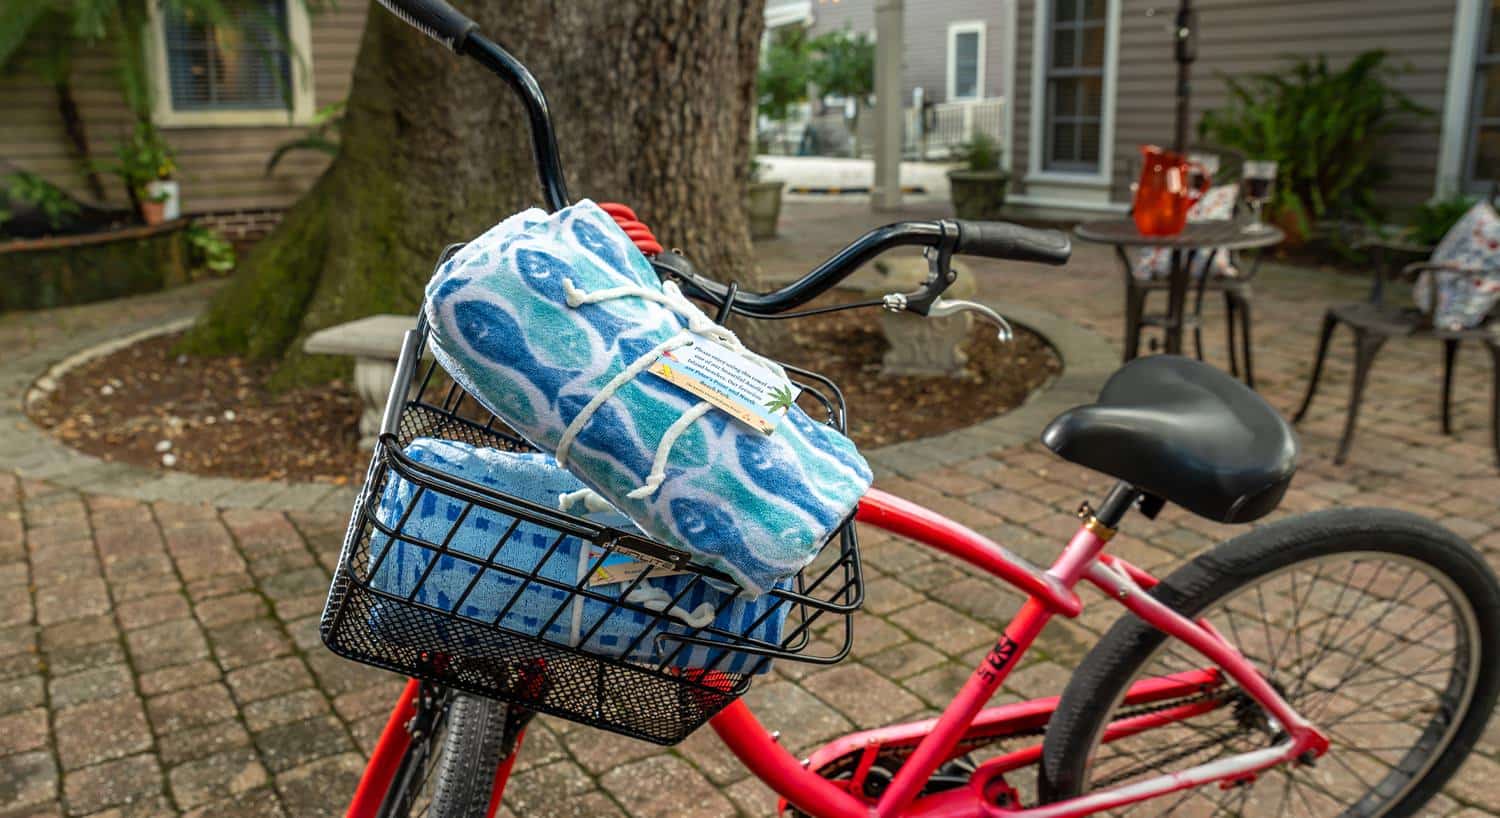 Close up view of red bike with a basket holding two rolled up beach towels